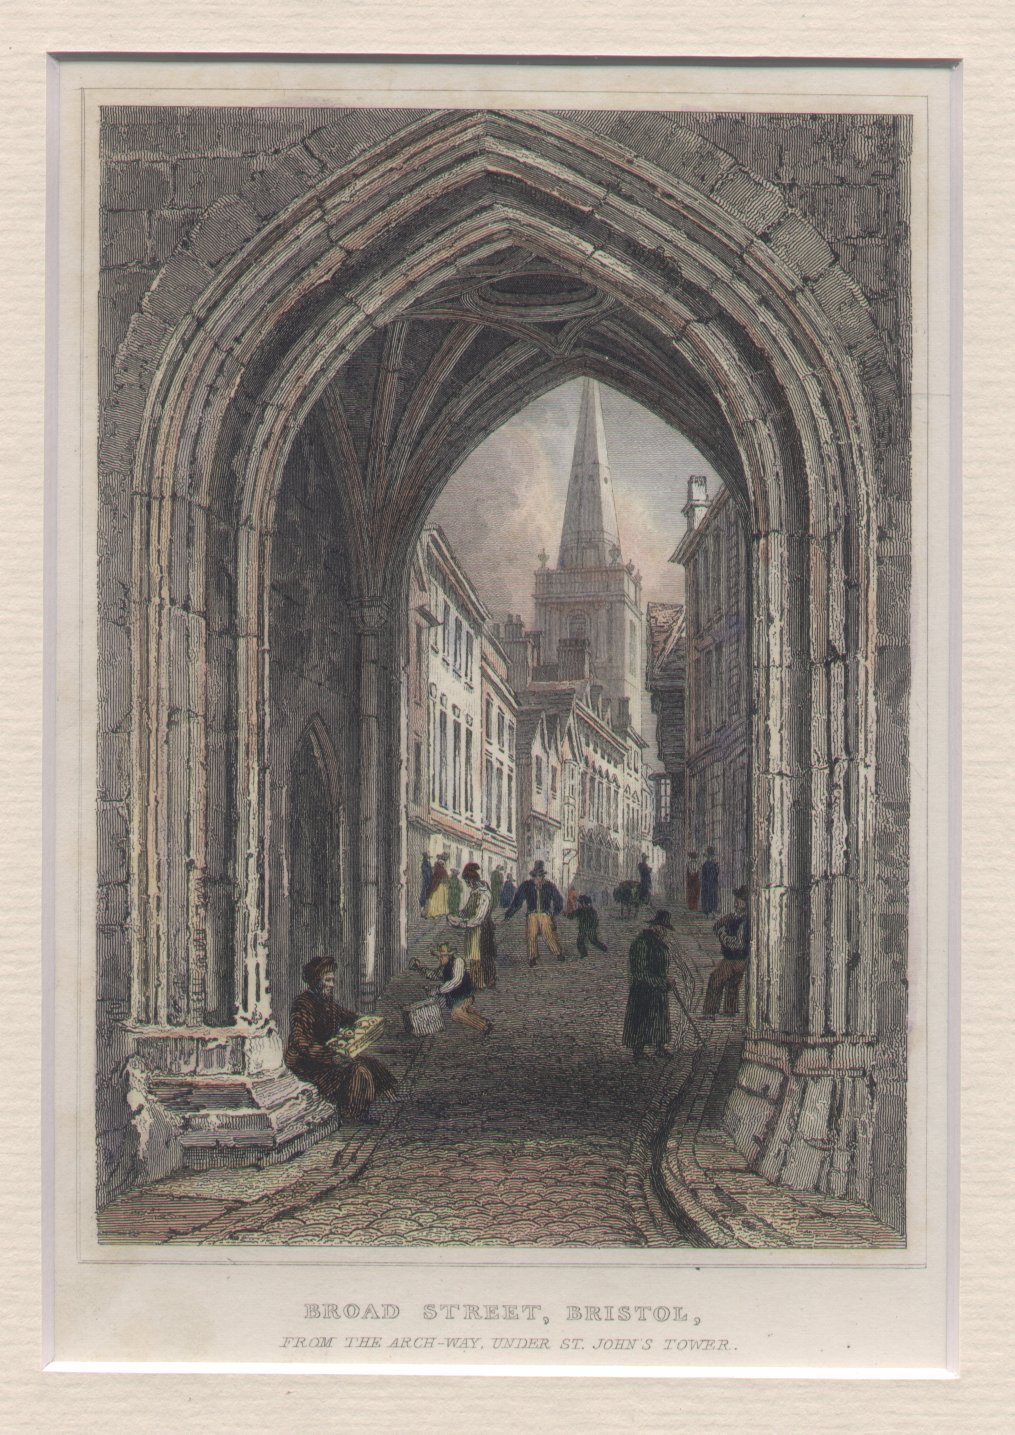 Print - Broad Street, Bristol, from the Arch-way under St.John's Tower